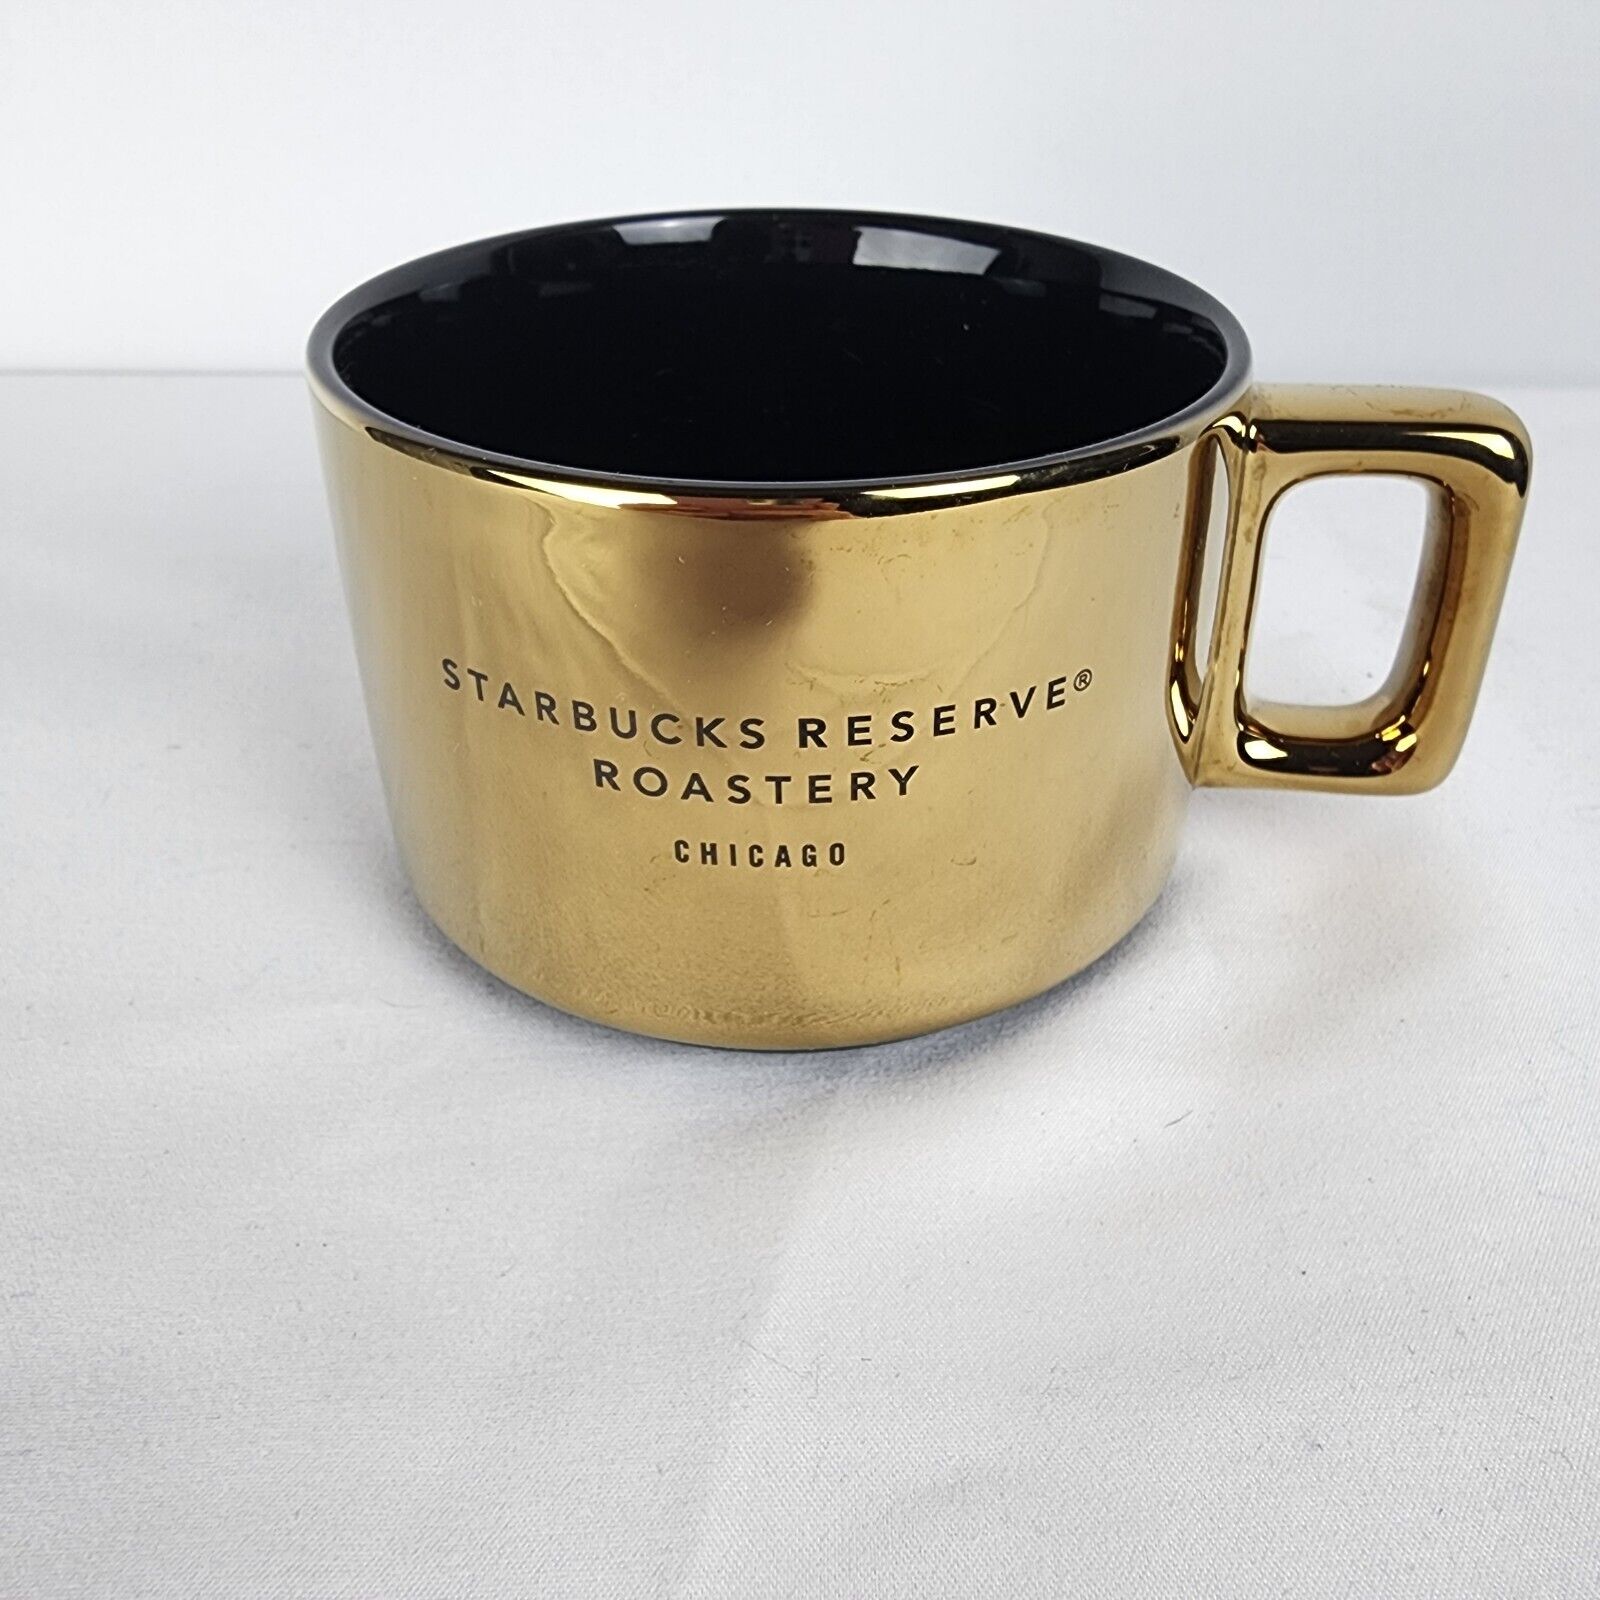 Starbucks Reserve Roastery Chicago Gold Coffee Mug 10 Oz Collector Ceramic Cup